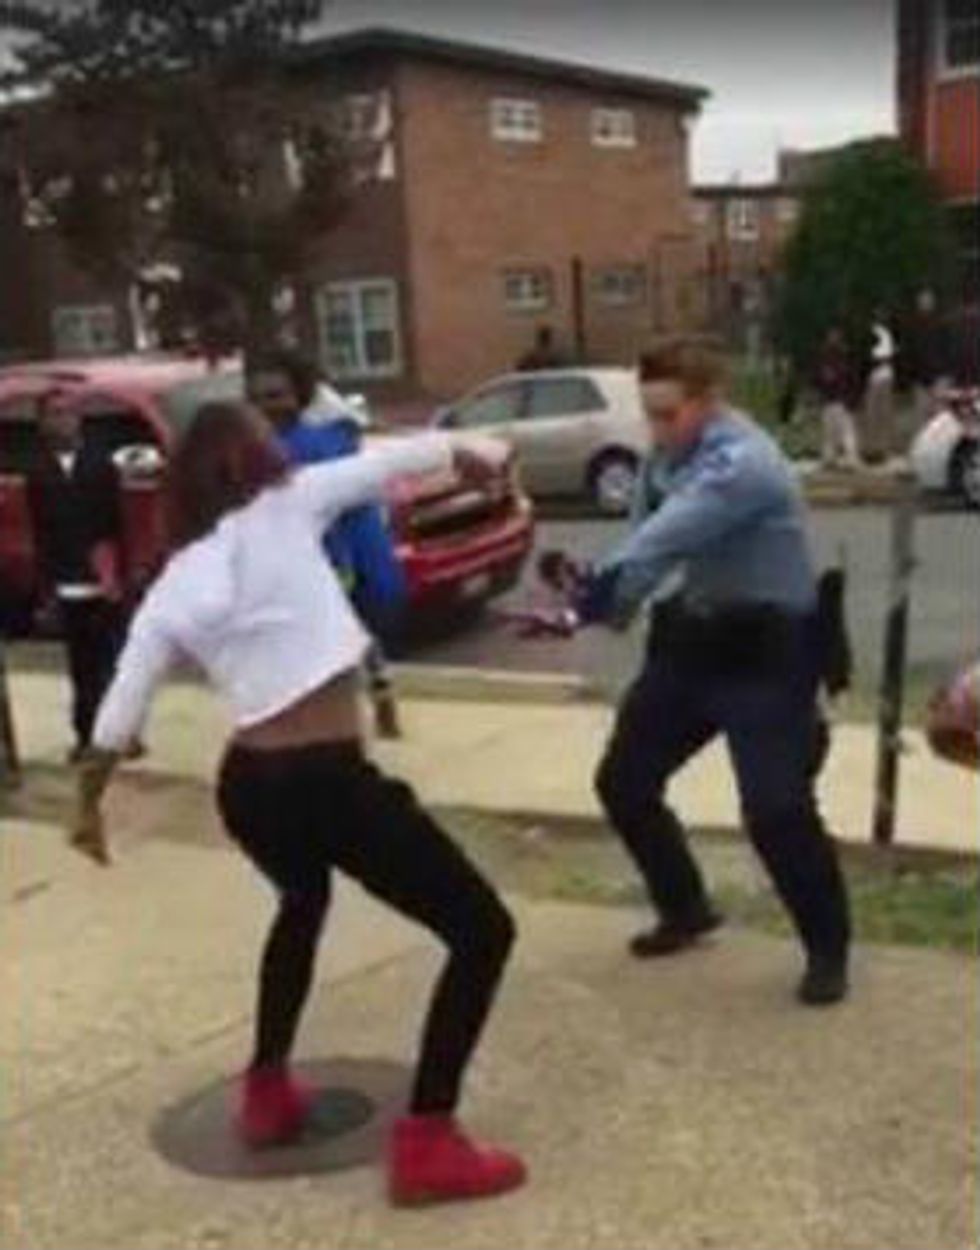 Cops Breaking Up Fight Call for Backup as Situation Grows Tense — Then Teen Makes Unexpected Move Resulting in Epic Scene